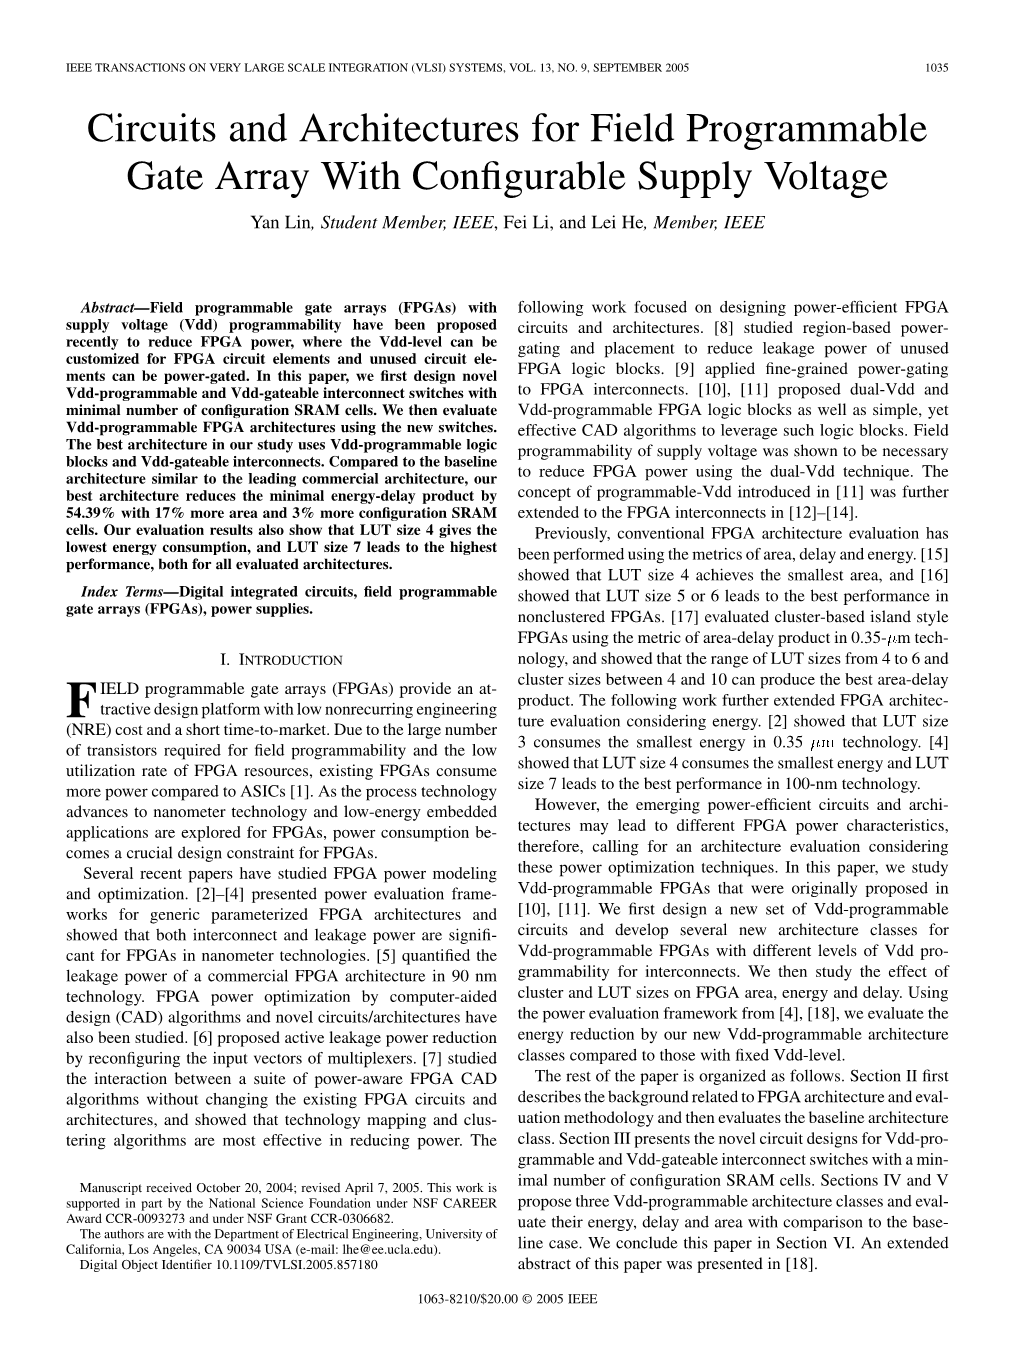 Circuits and Architectures for Field Programmable Gate Array with Conﬁgurable Supply Voltage Yan Lin, Student Member, IEEE, Fei Li, and Lei He, Member, IEEE